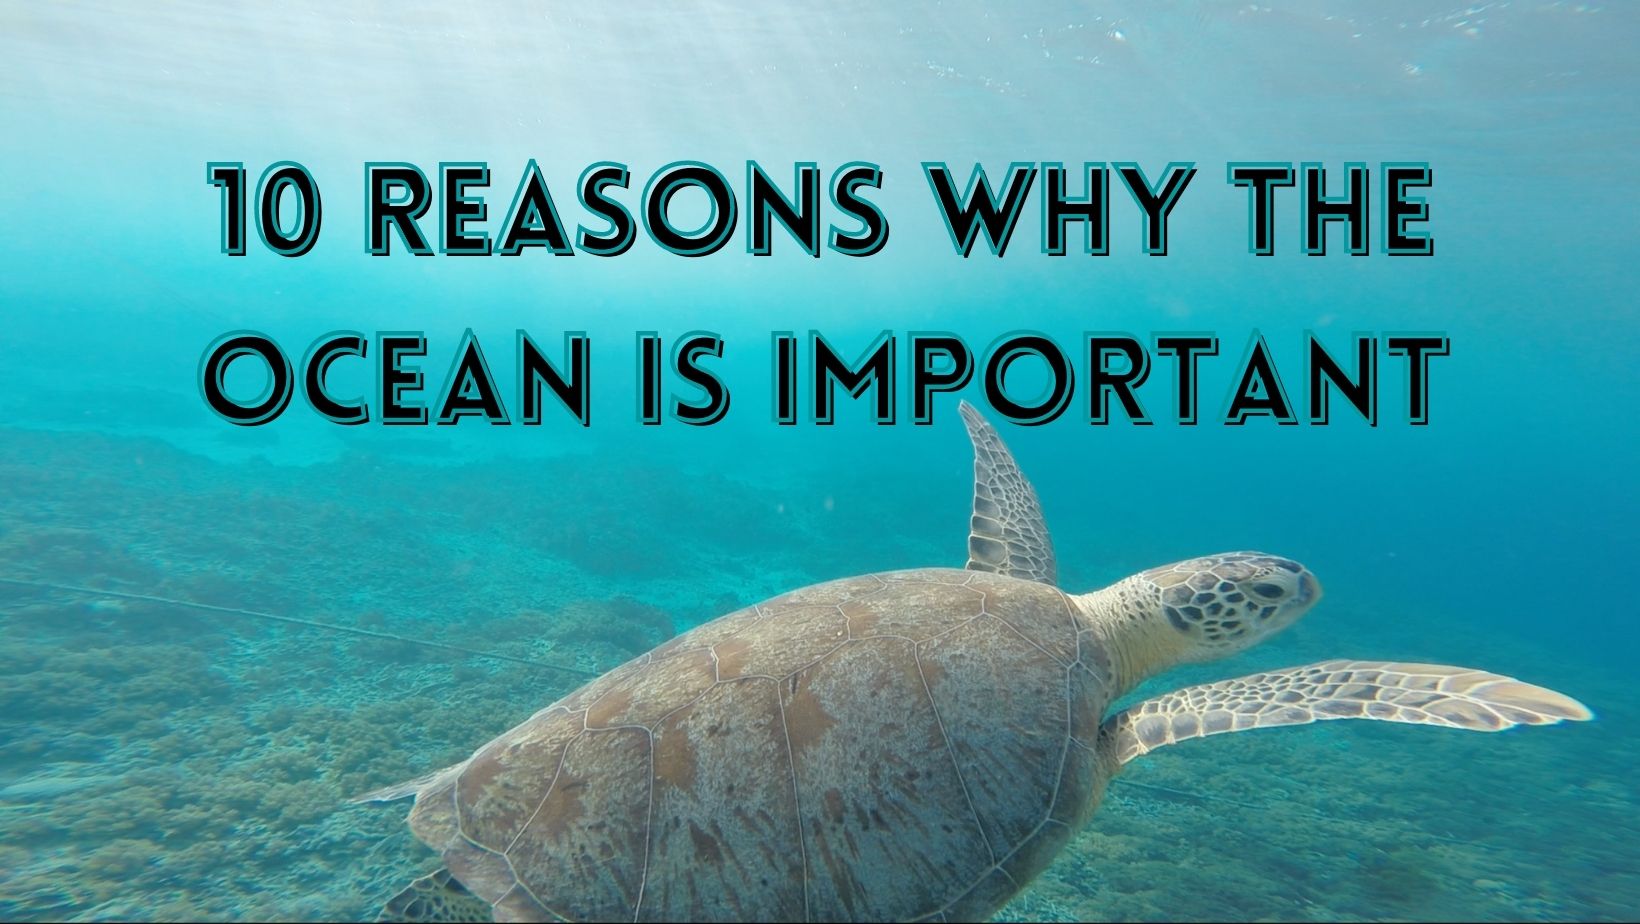 Why is the ocean important